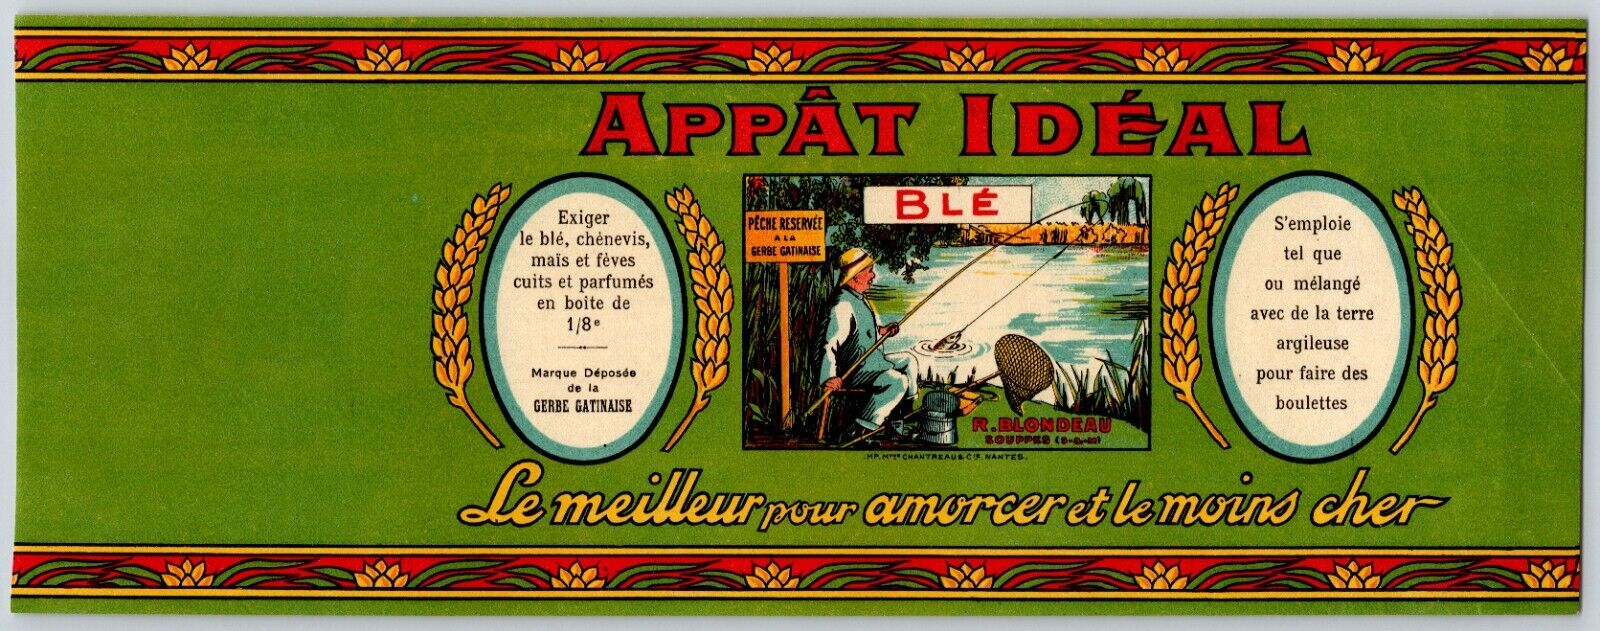 Appât Idéal Ideal Bait French Paper Can Label c1910's- 20's -Man Fishing in Lake